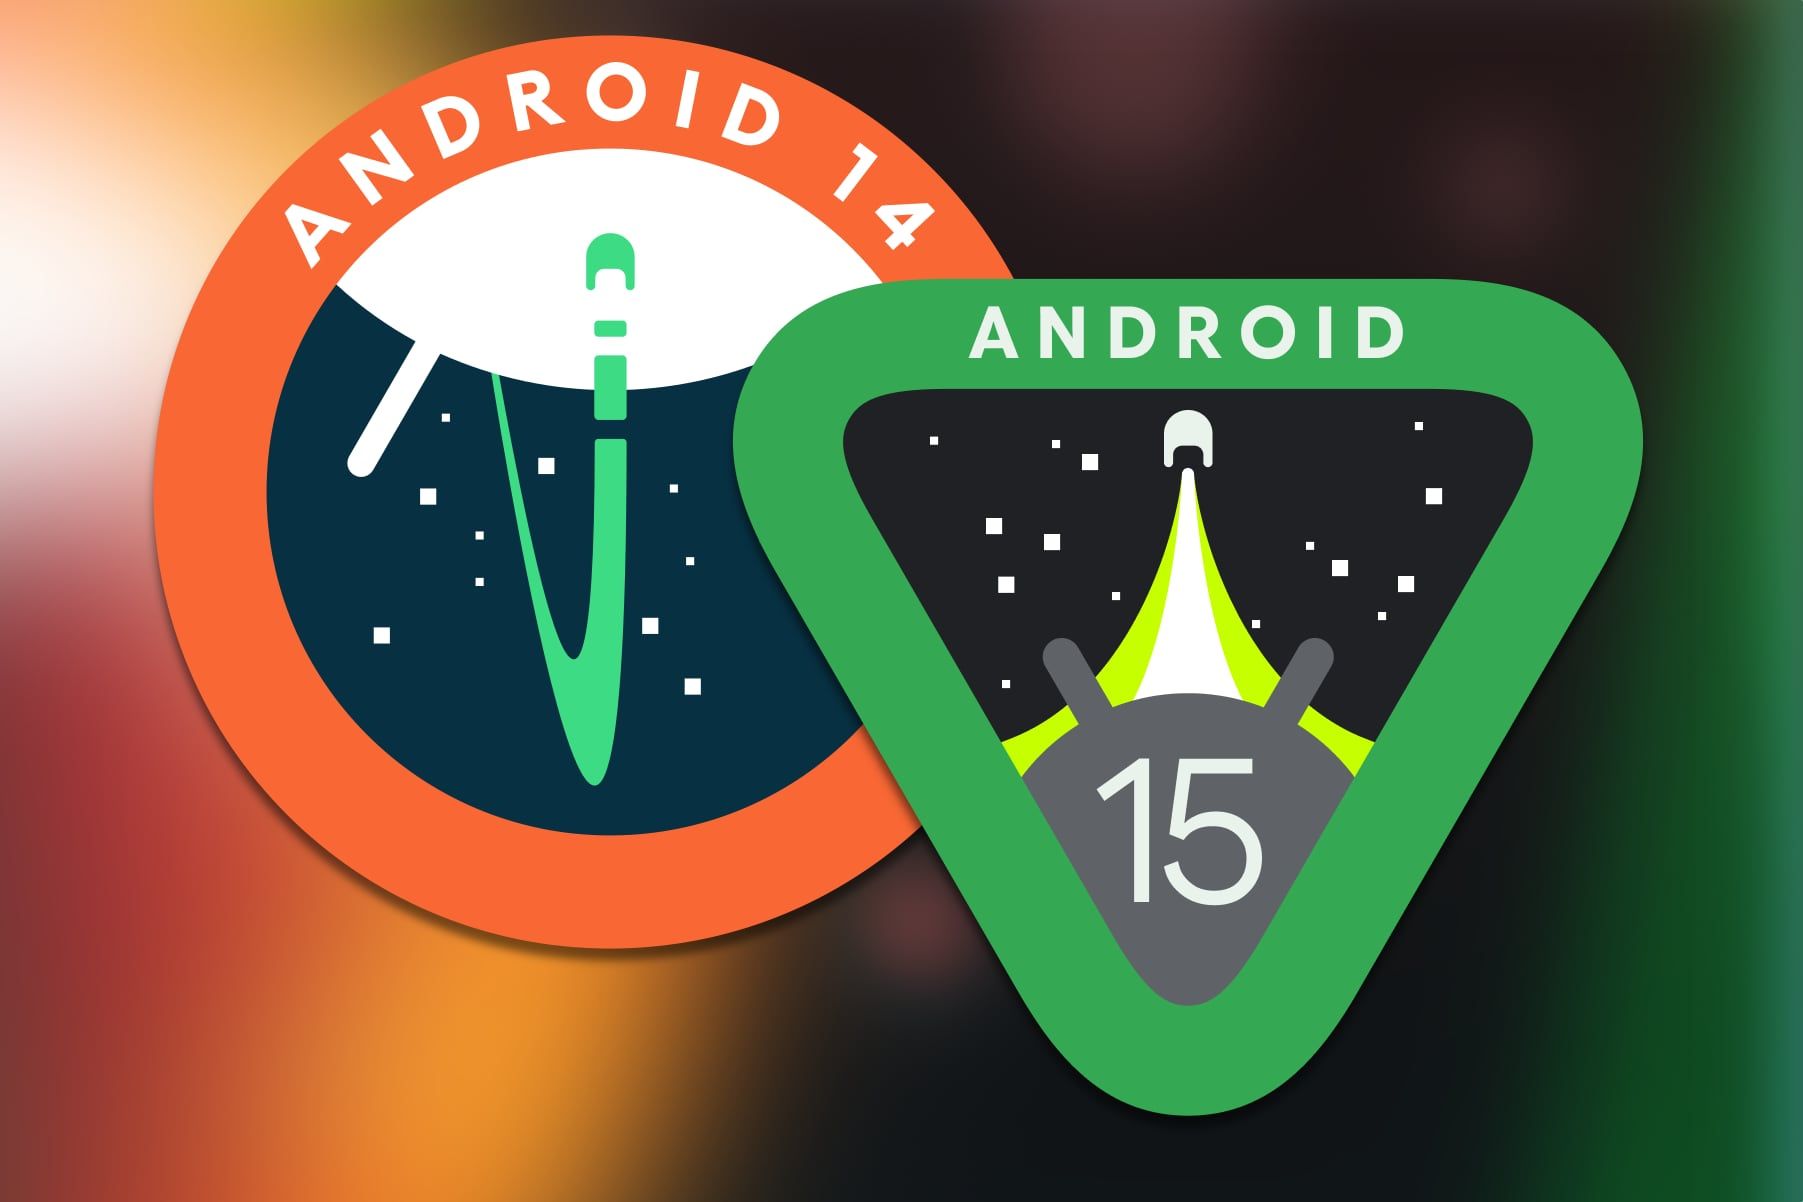 The Android 14 logo overlapped by the Android 15 logo on a colorful background